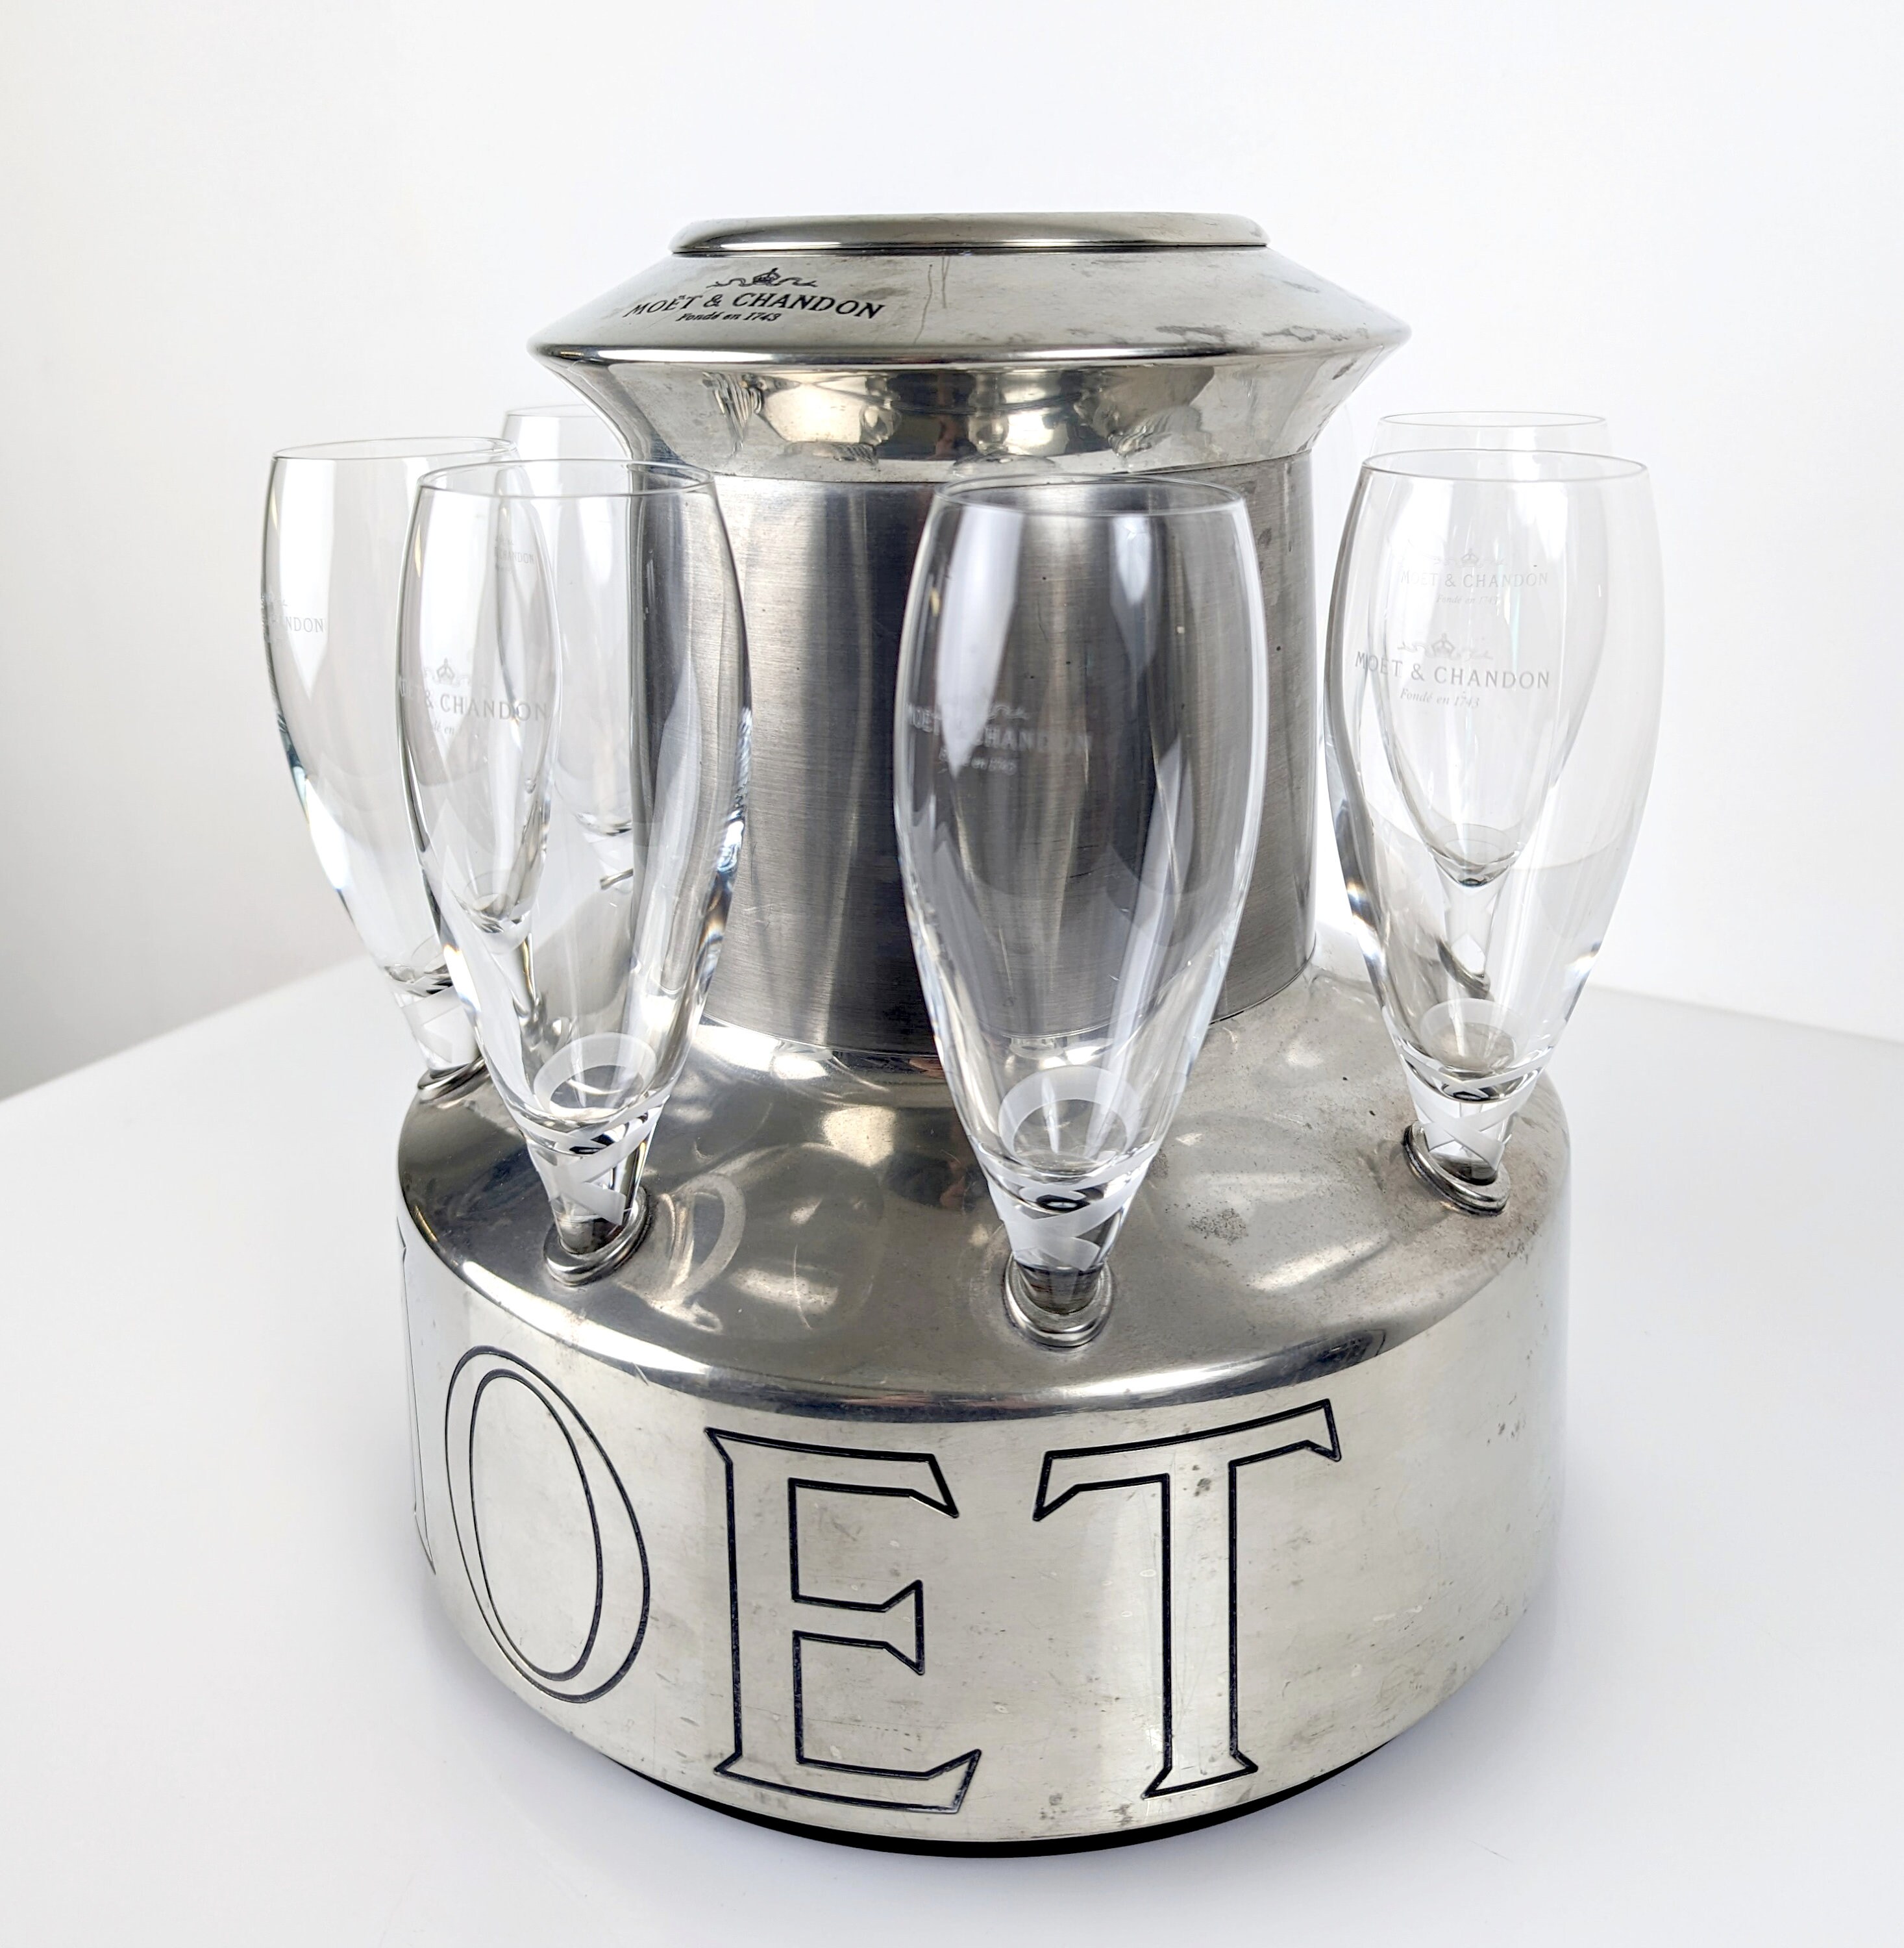 Moet & Chandon Rotating Champagne Cooler for Louis Vuitton for